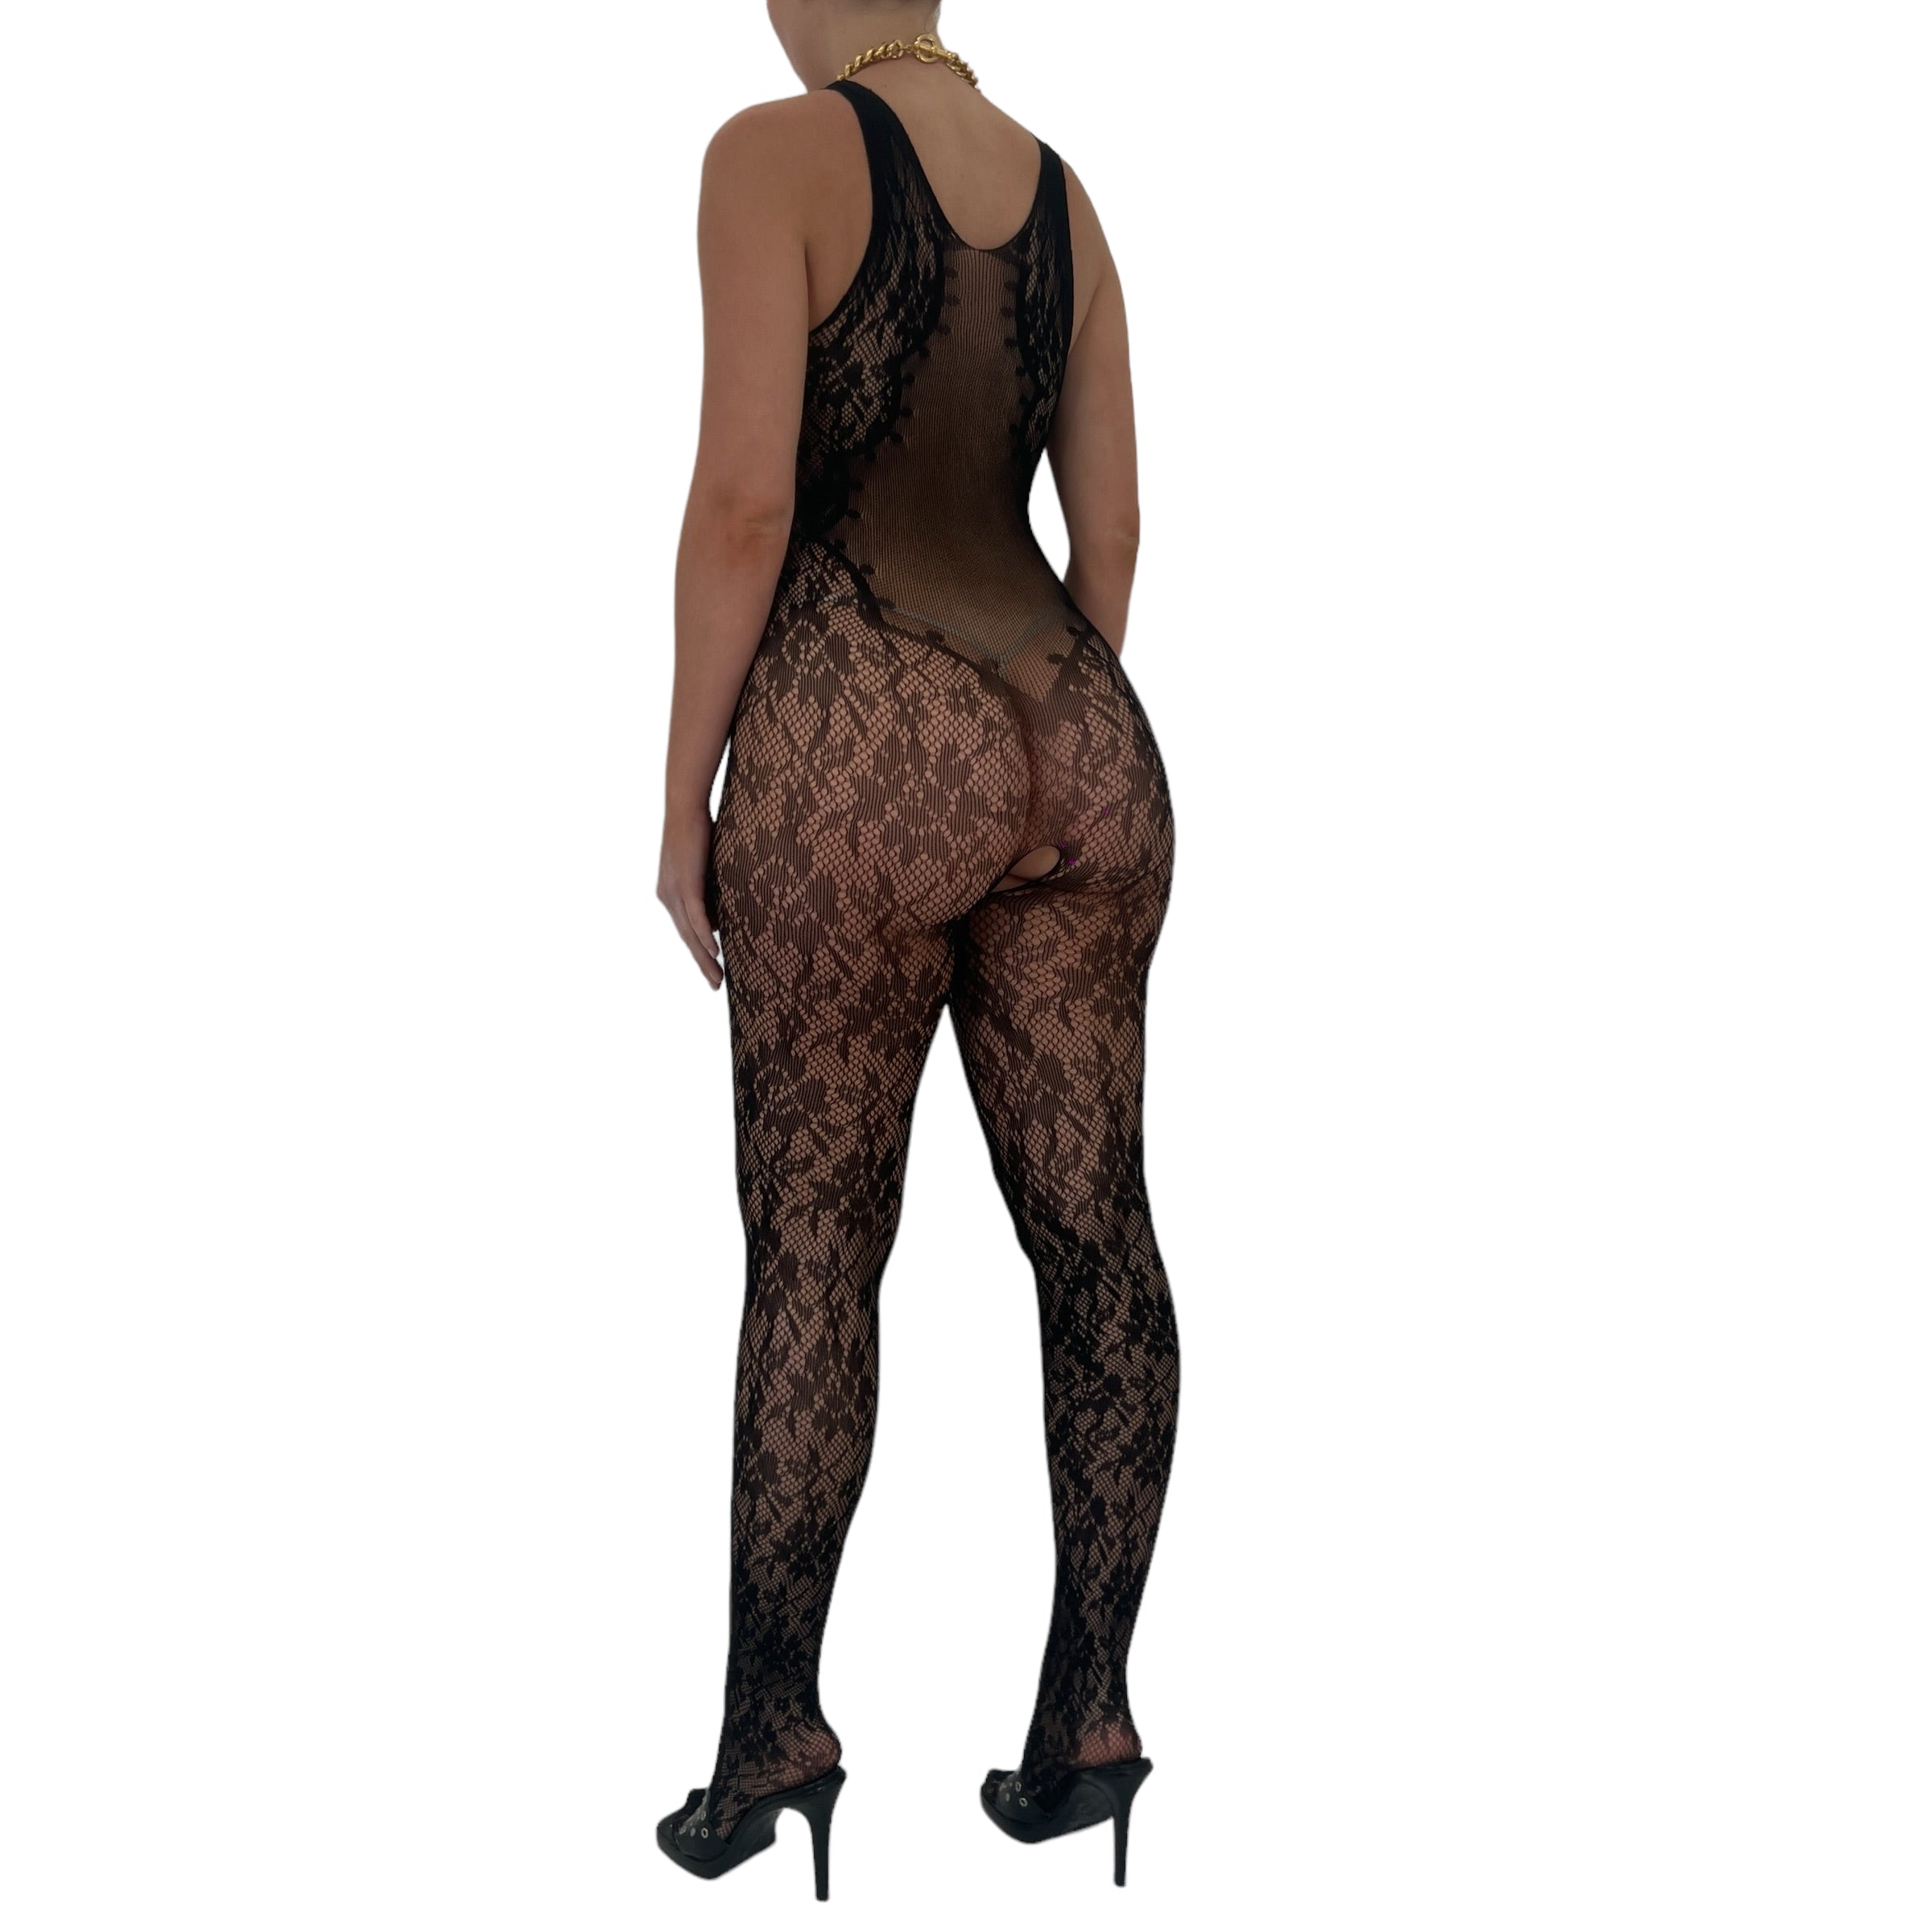 *Maria* Floral Lace Sheer Bodystocking - Black [XS-L]